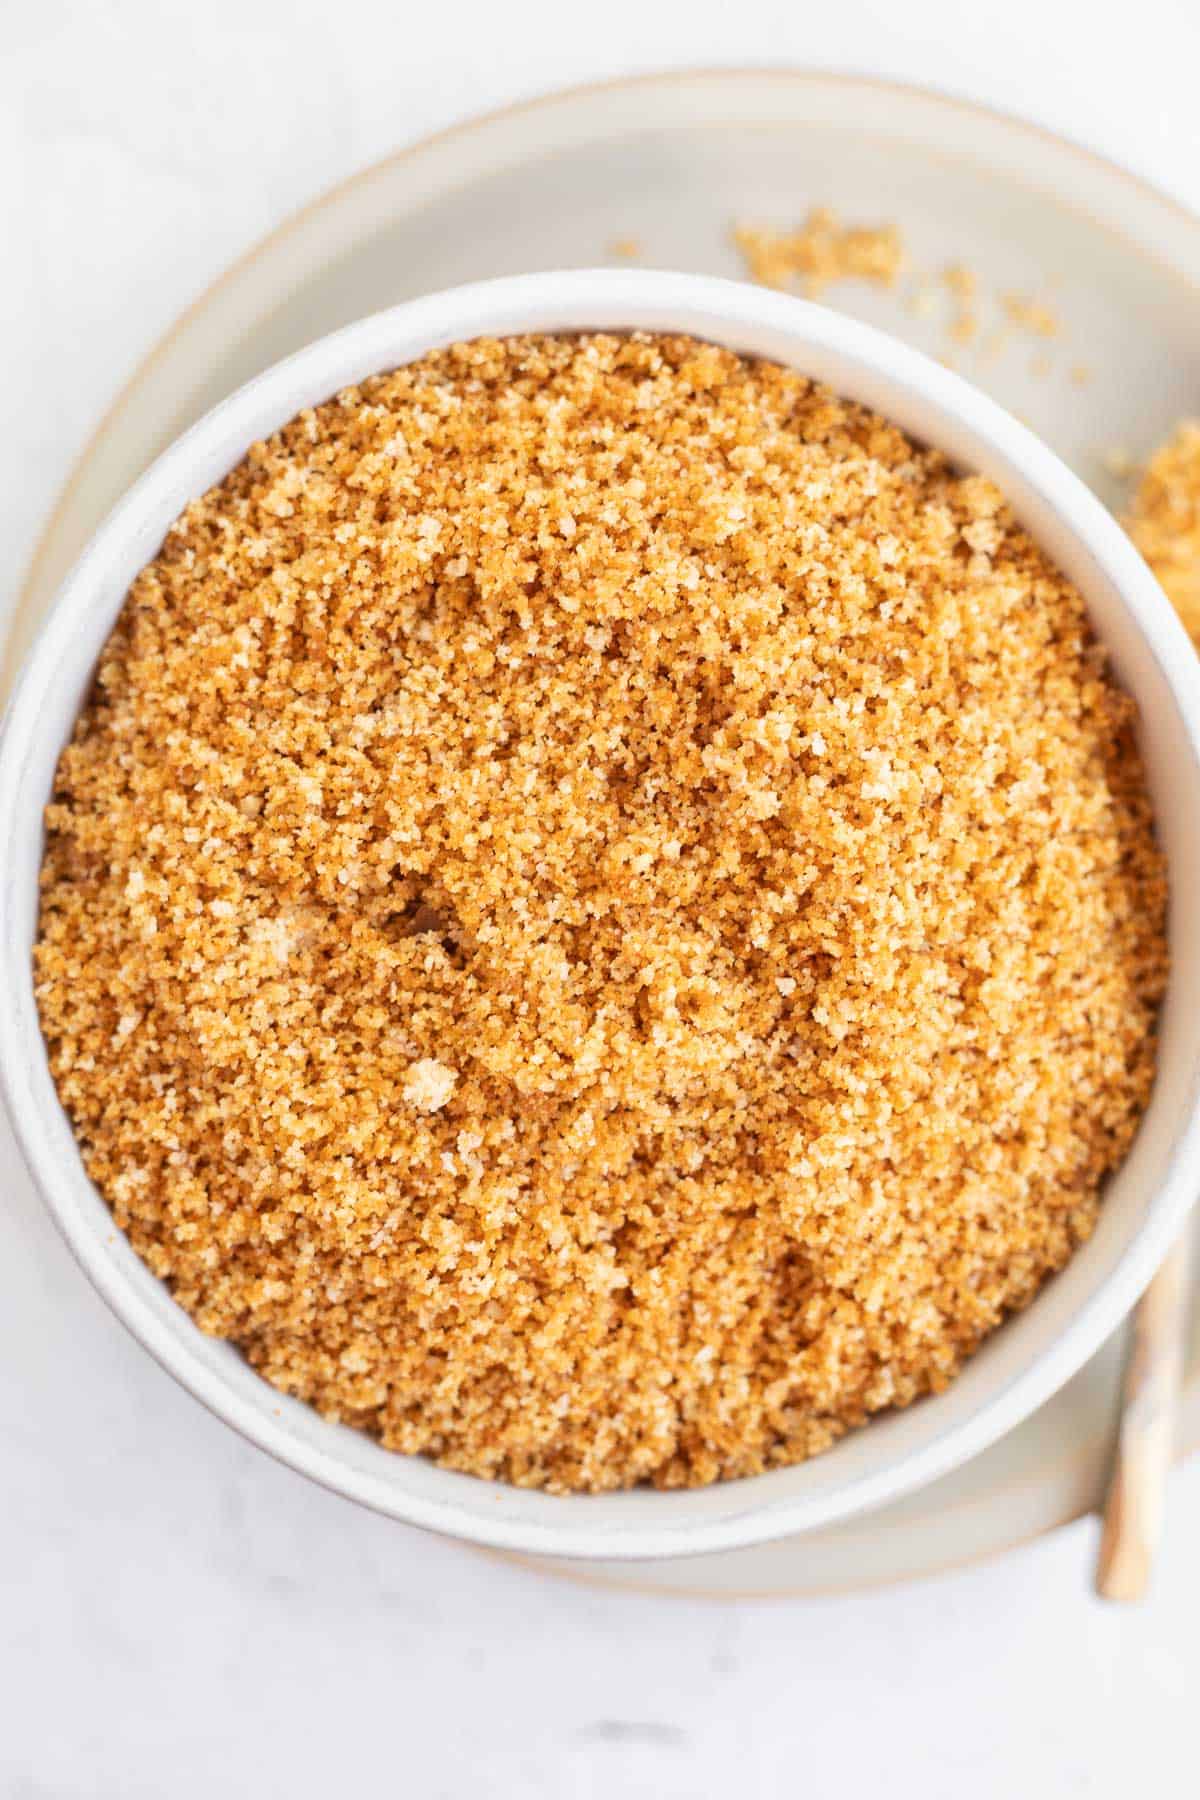 a white bowl filled with homemade gluten free bread crumbs.